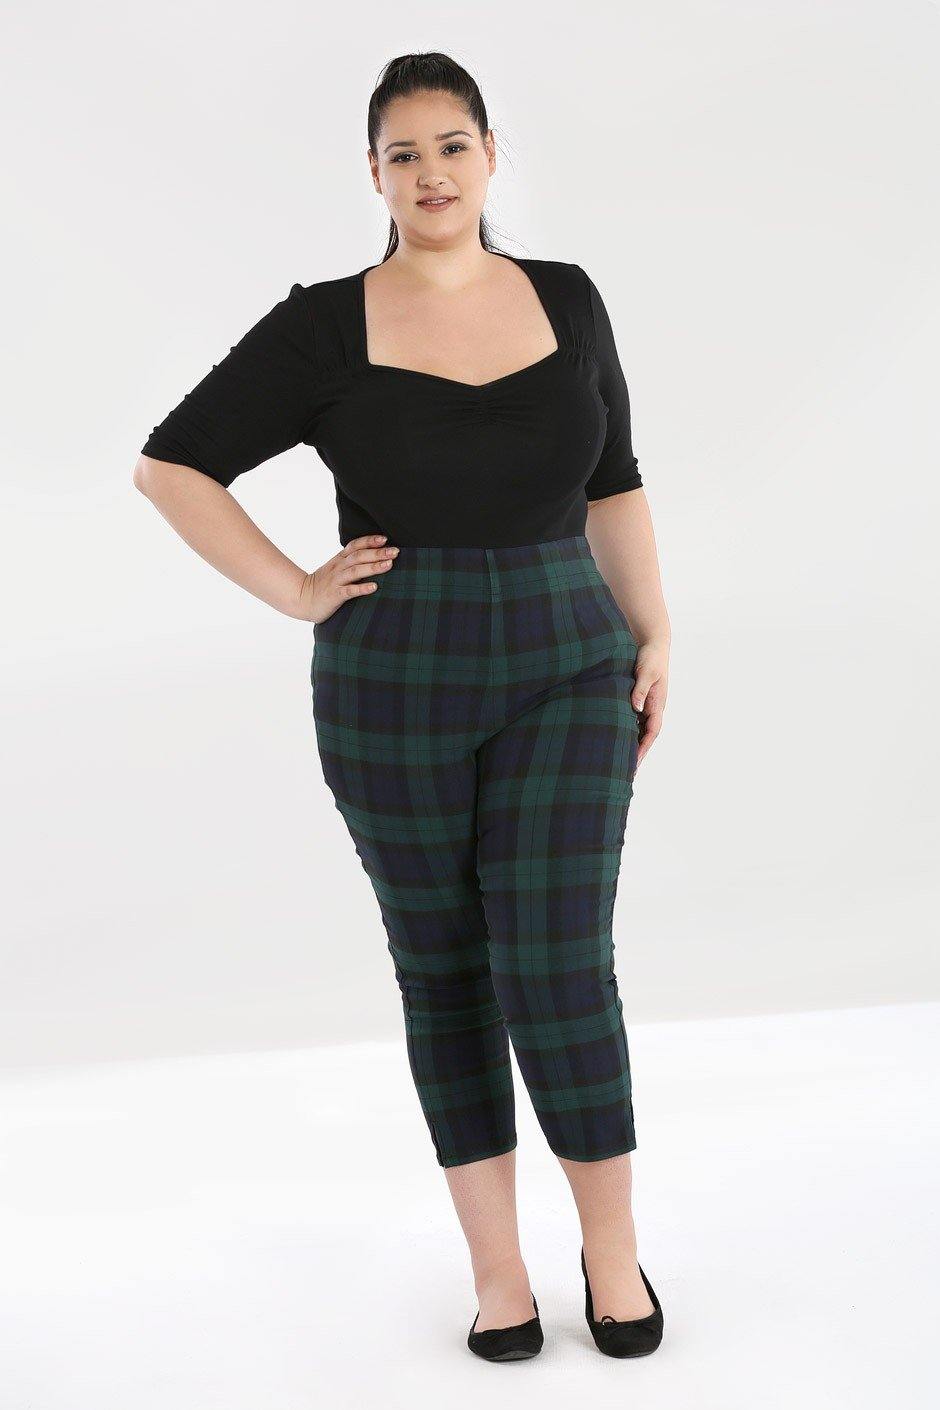 Plaid Vintage Style High Waisted Trousers by Voodoo Vixen - Dark Fashion  Clothing